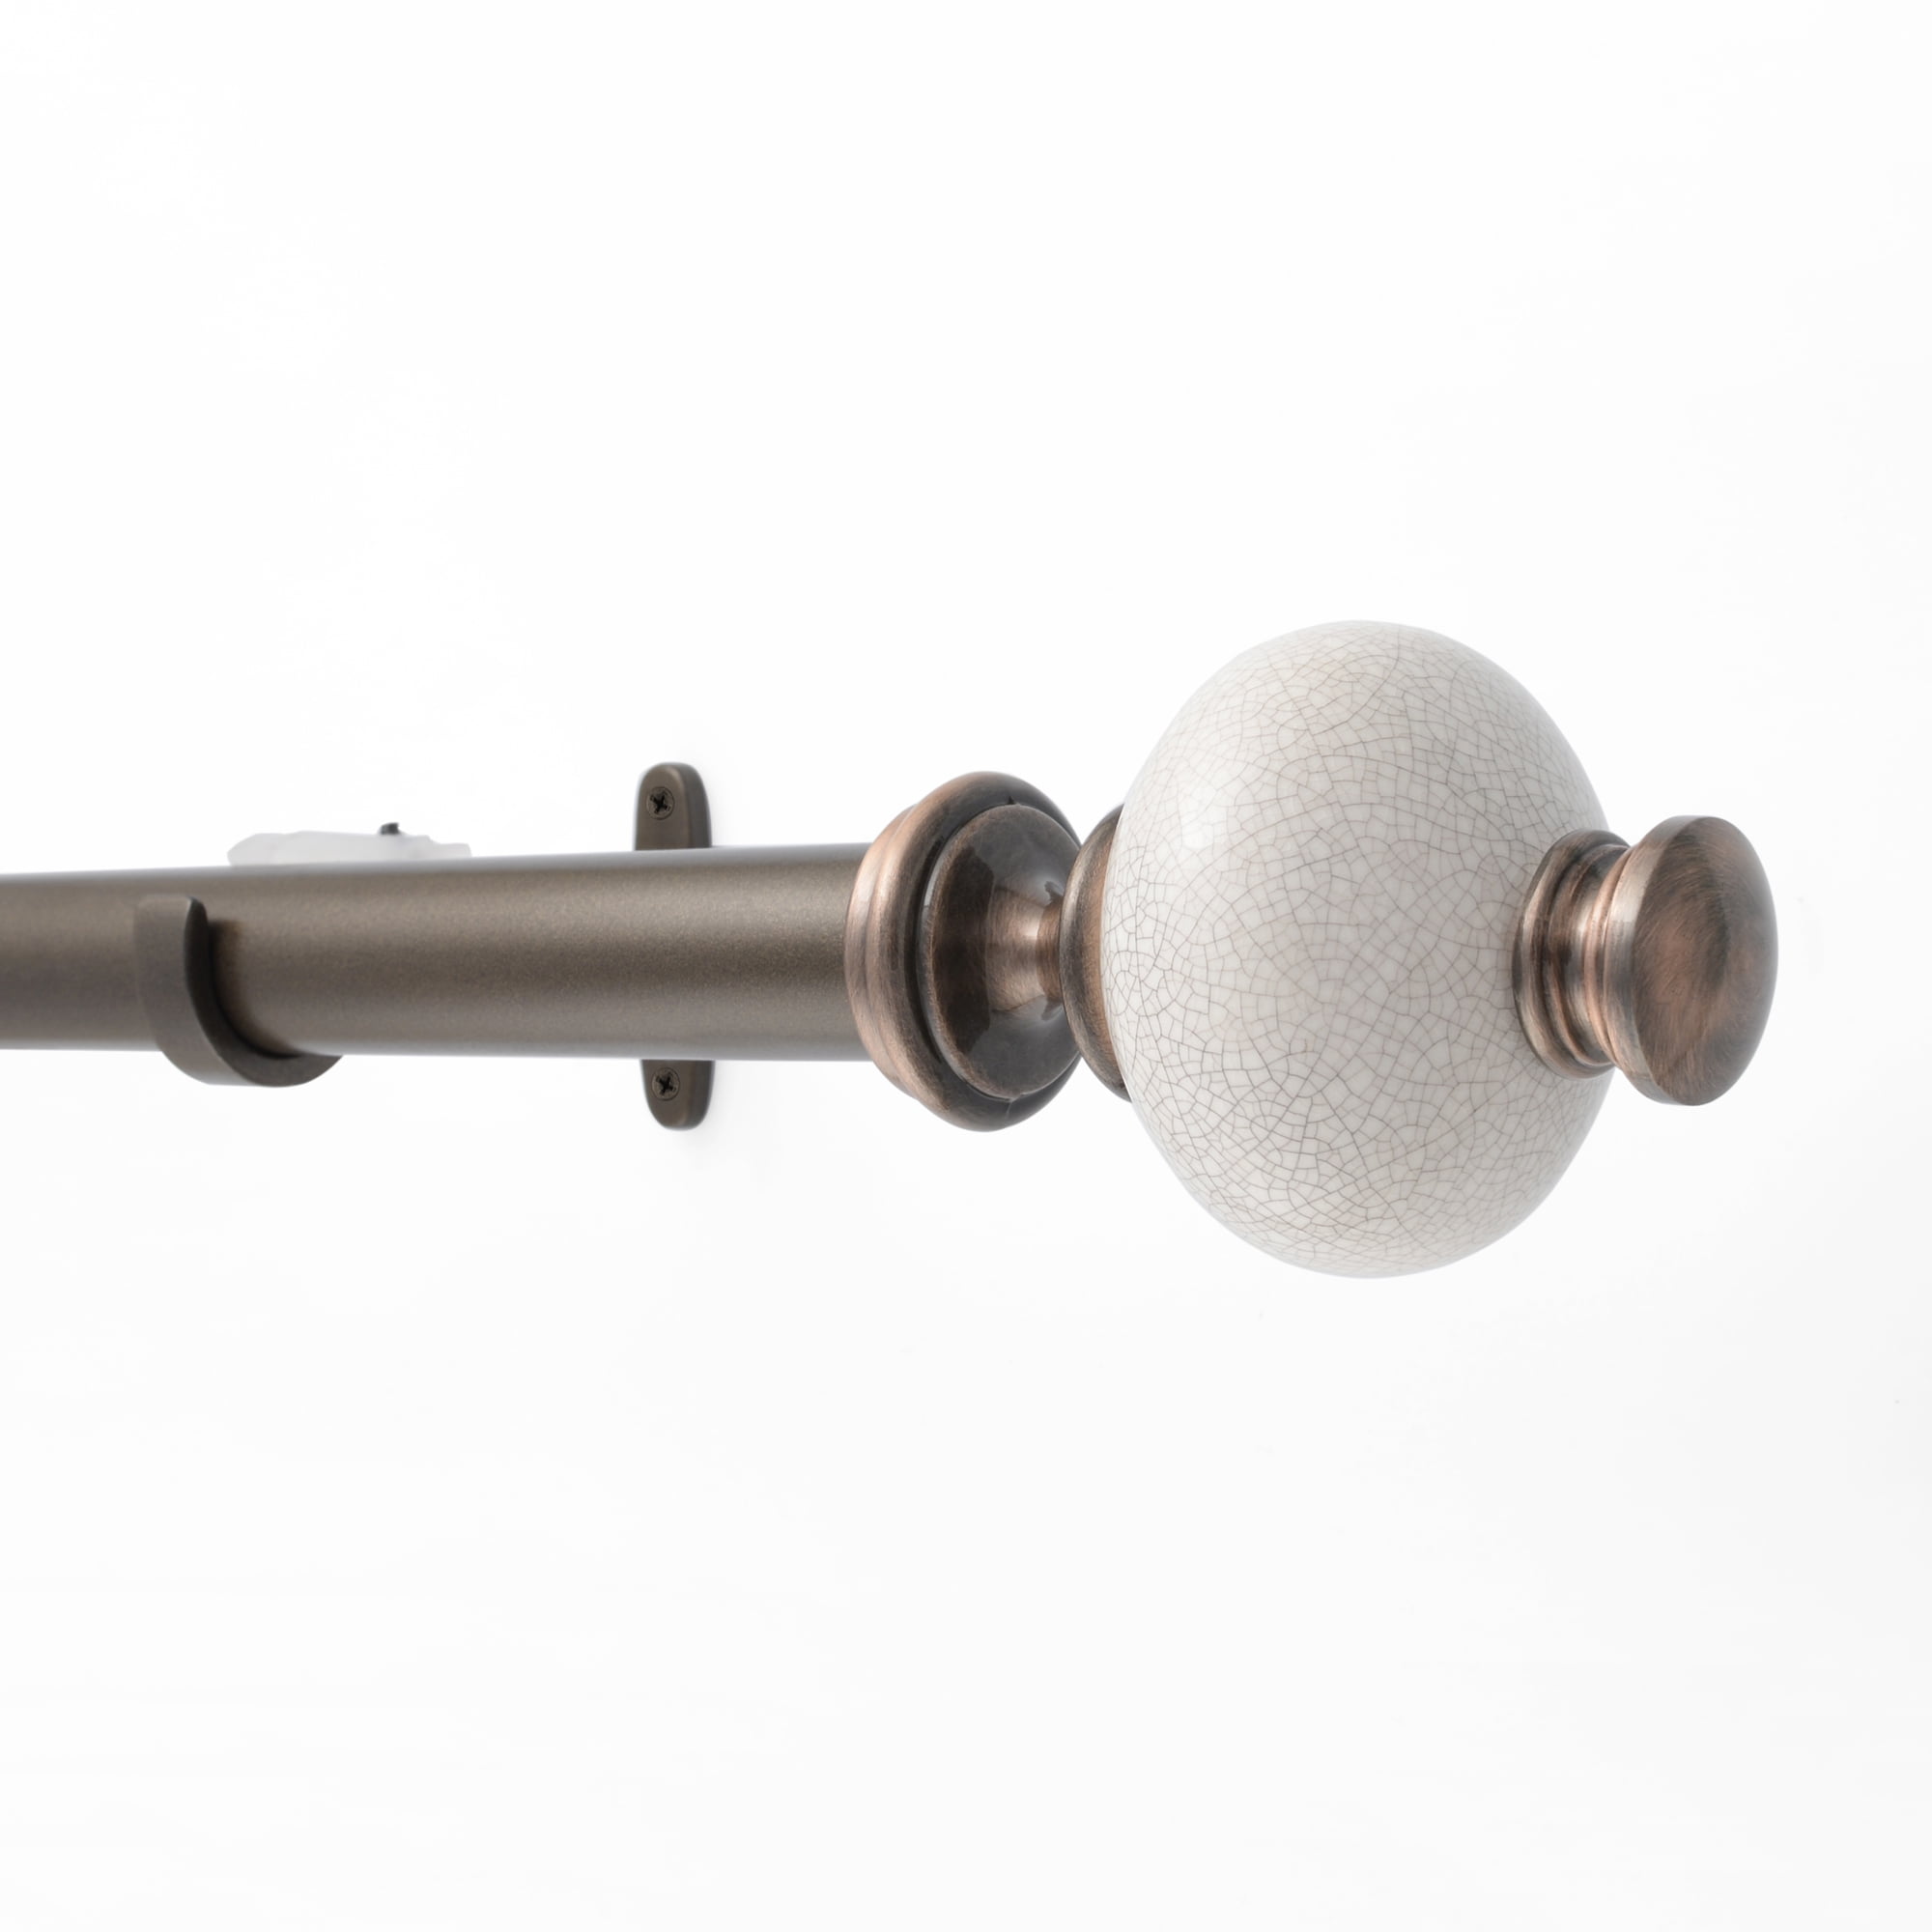 Curtain Hardware Essentials: From Rods To Finials